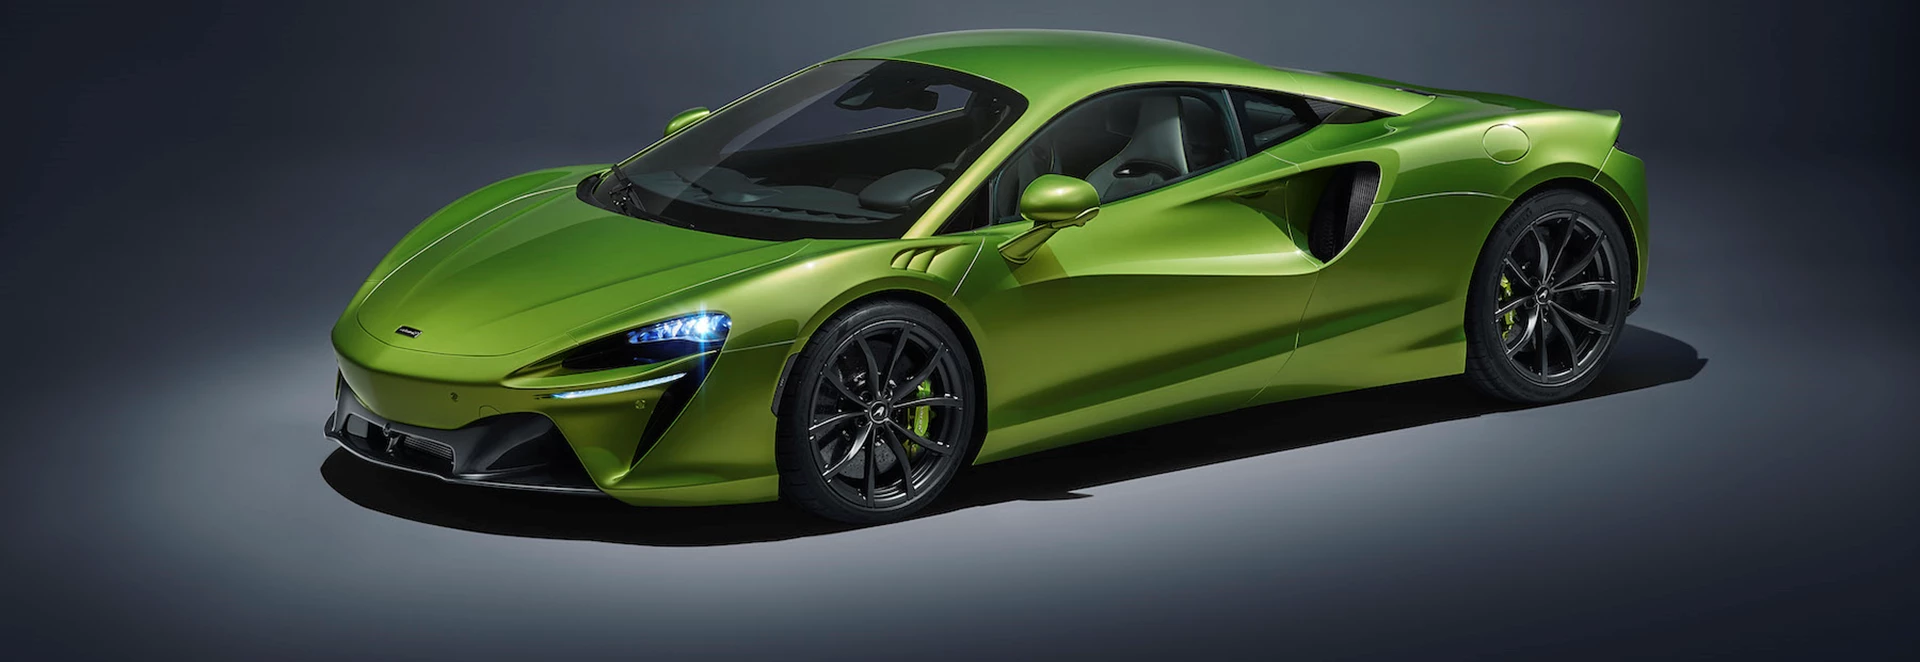 This is the new 671bhp McLaren Artura plug-in hybrid supercar 